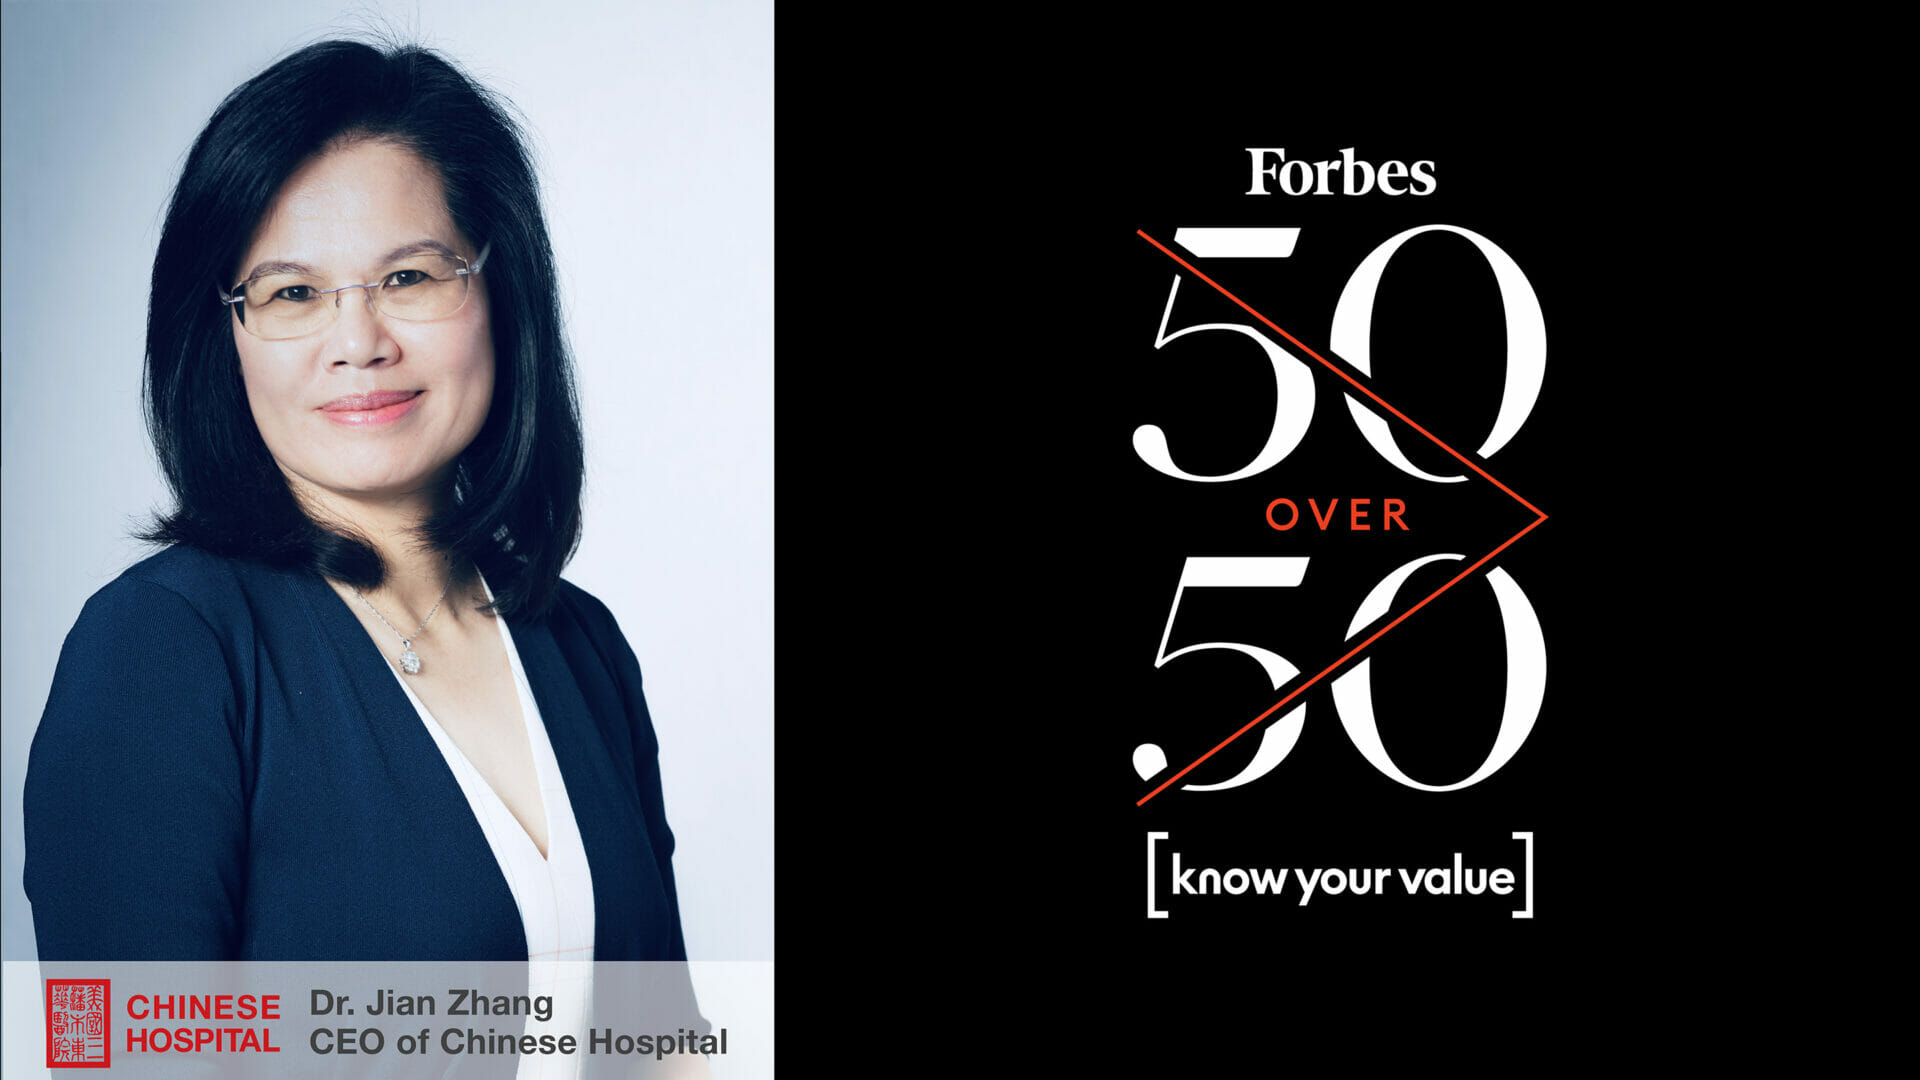 Chinese Hospital’s CEO, Dr. Jian Zhang Honored in Forbes 50 Over 50 List  for Her Visionary Leadership in Promoting Health Equity